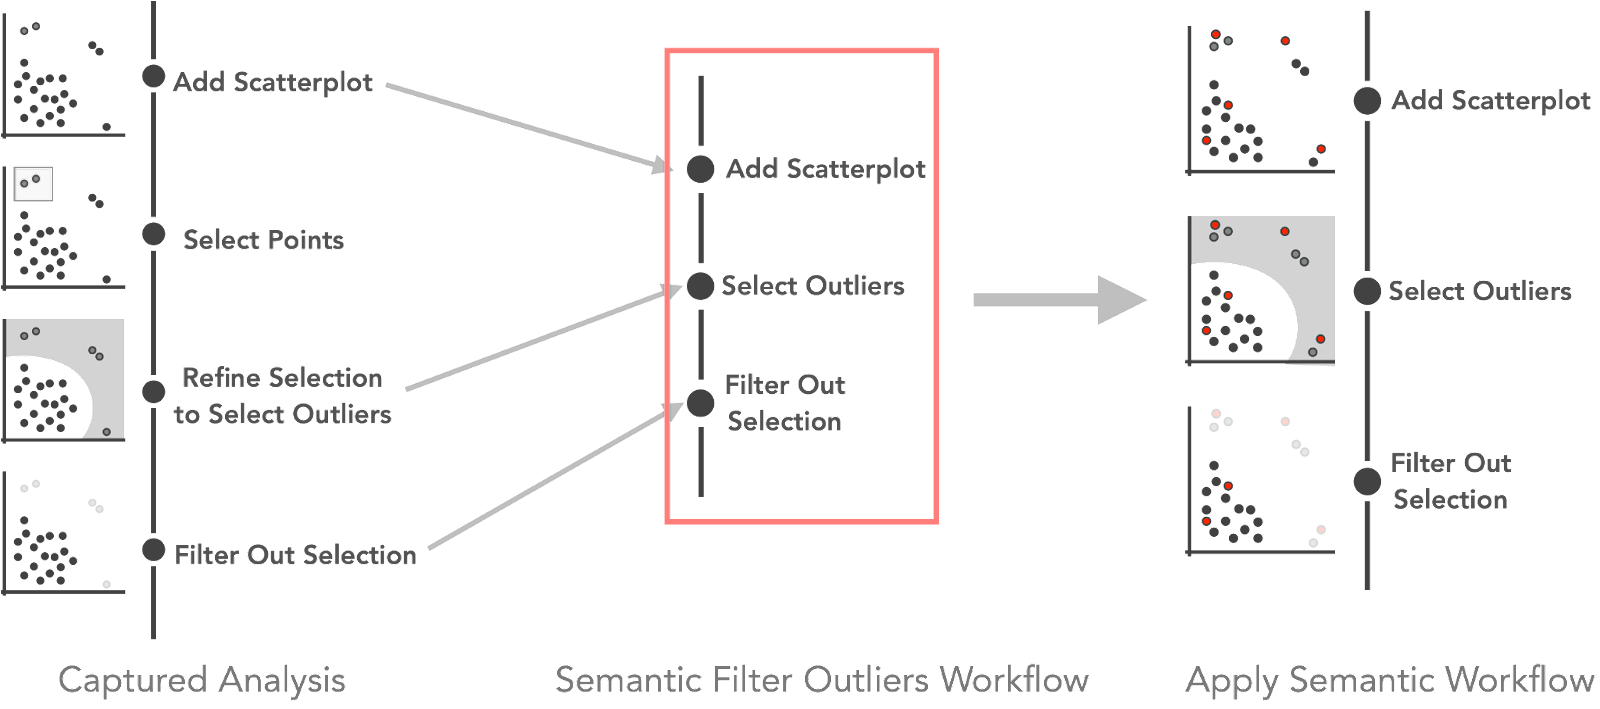 The figure shows captured analysis in the first column, curated workflow in the second column, and results of applying the workflow in the third column. The captured analysis has four steps — add scatterplot, select points, refine selections to select outliers, and filter out selections. The curated workflow has three steps — add a scatterplot, select outliers, and filter out selections. The workflow is labeled ‘Filter outliers workflow.’